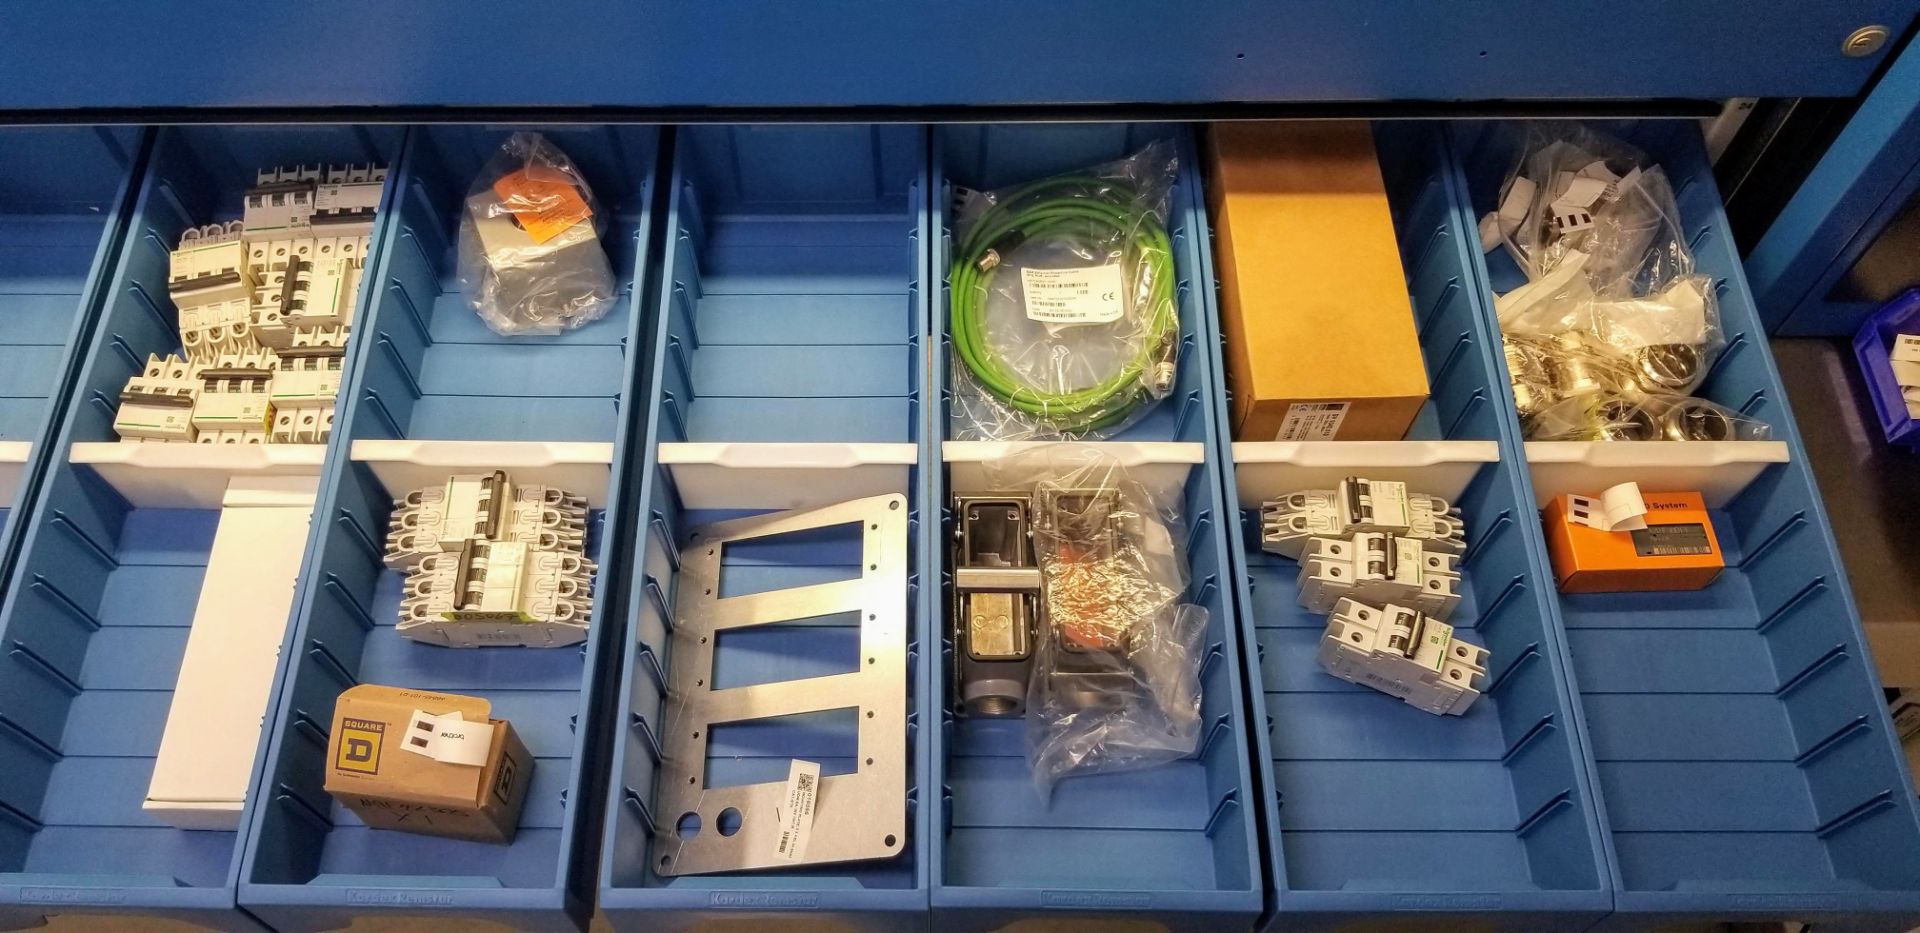 LOT - CONTENTS OF 36 SHELVES INCLUDING: MOTOR CABLES, HYBRID CABLES, PLUGS, INPUT CARDS, MODULES, - Image 68 of 100